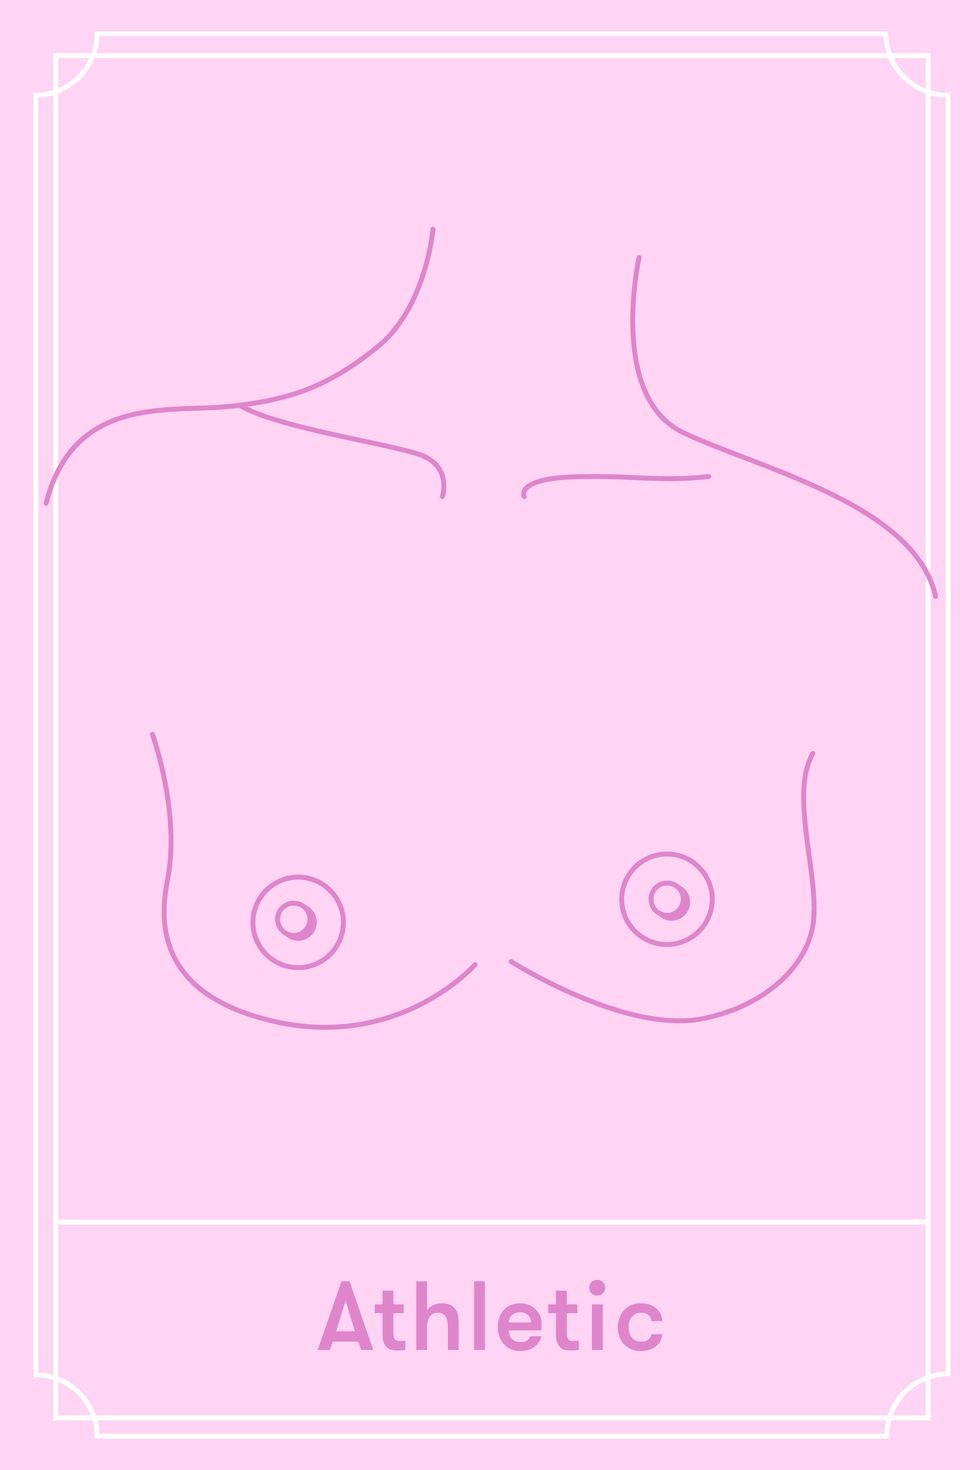 Athletic types of breast shapes